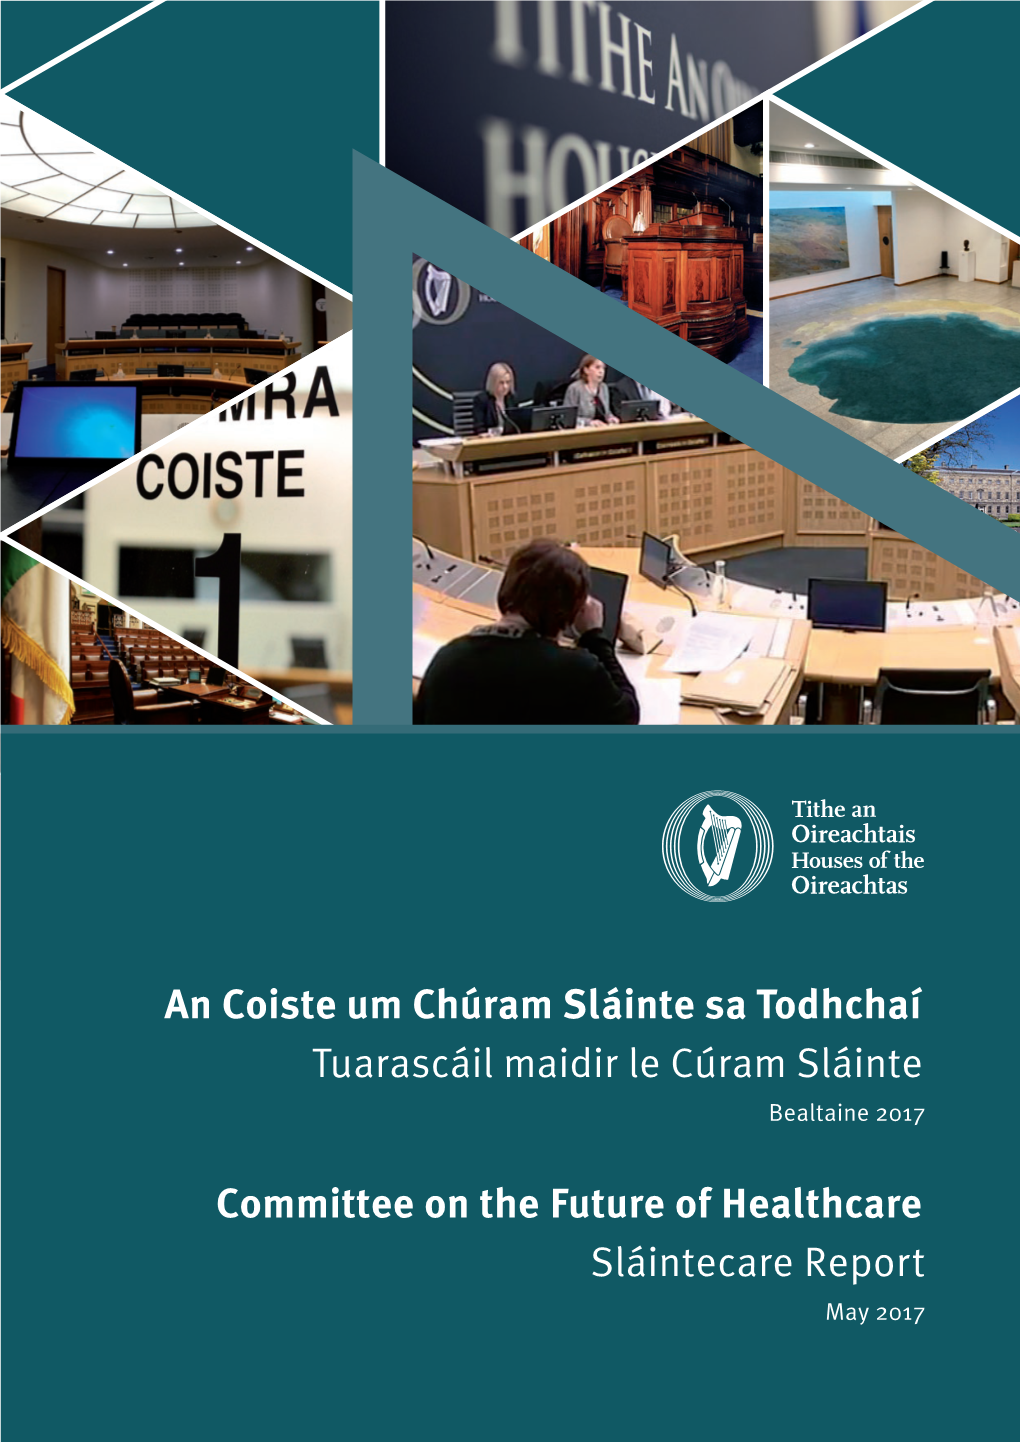 Committee on the Future of Healthcare Sláintecare Report May 2017